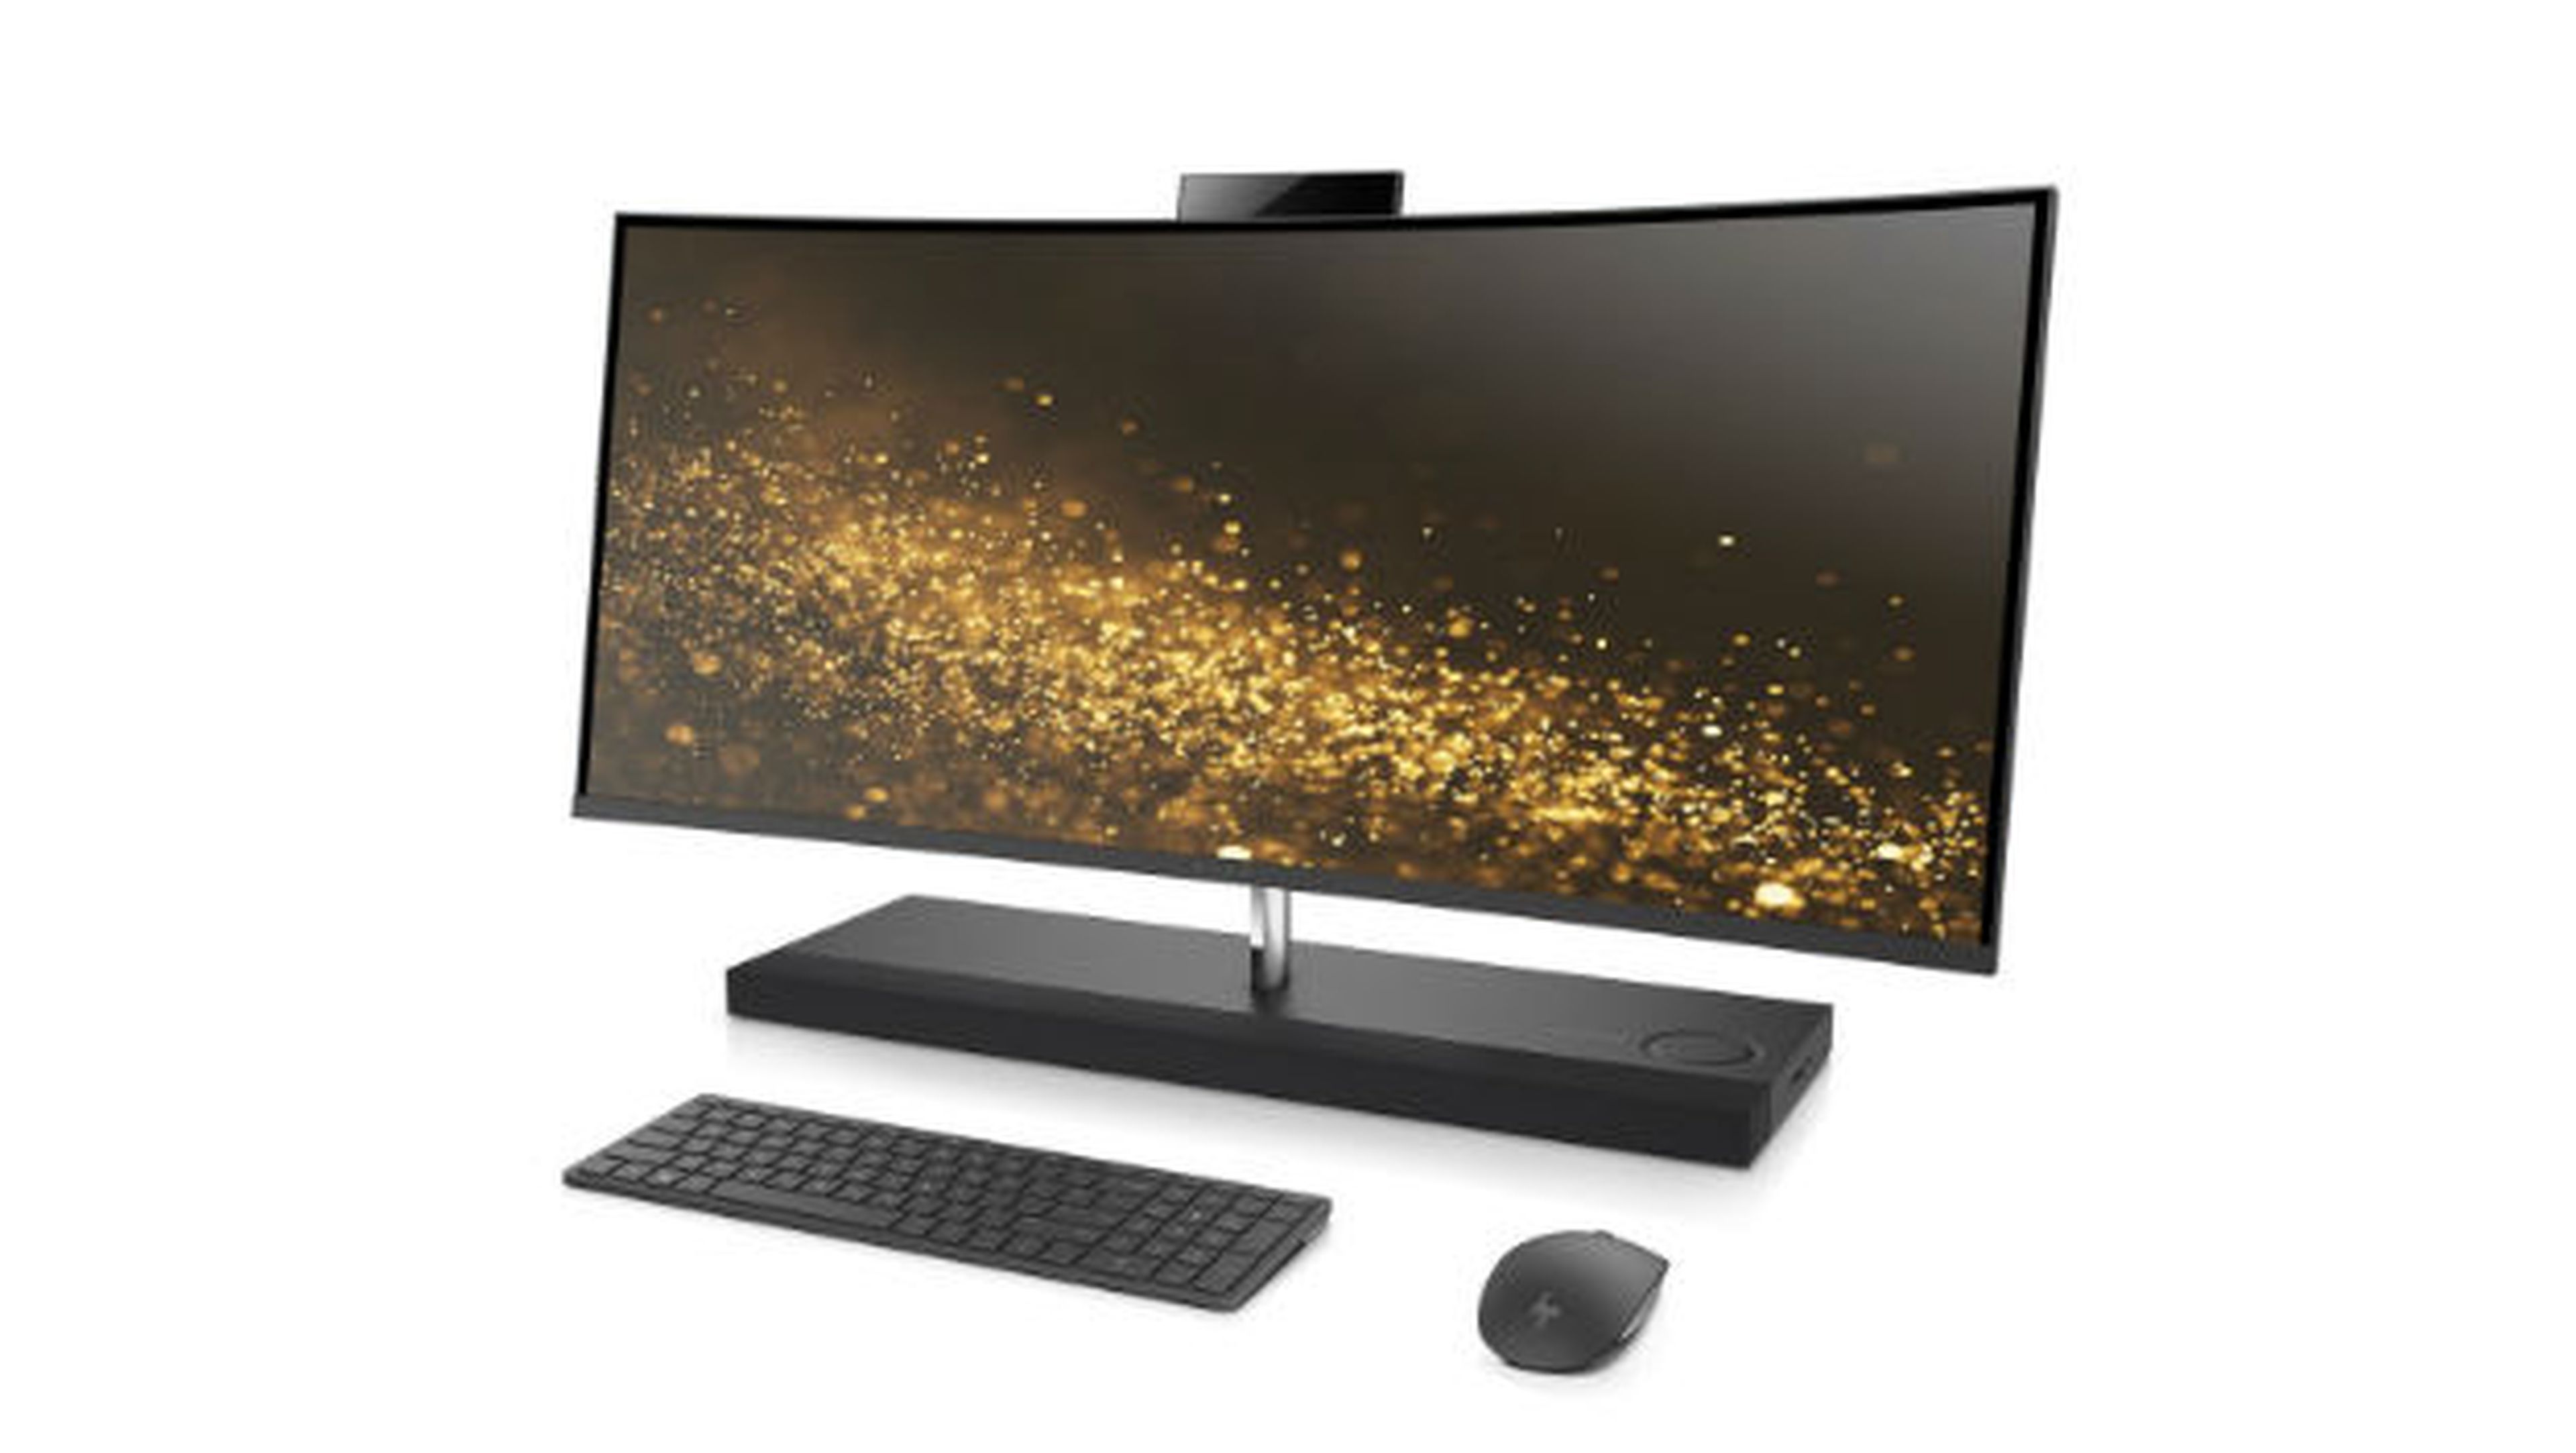 HP Envy Curved All in One 2017.